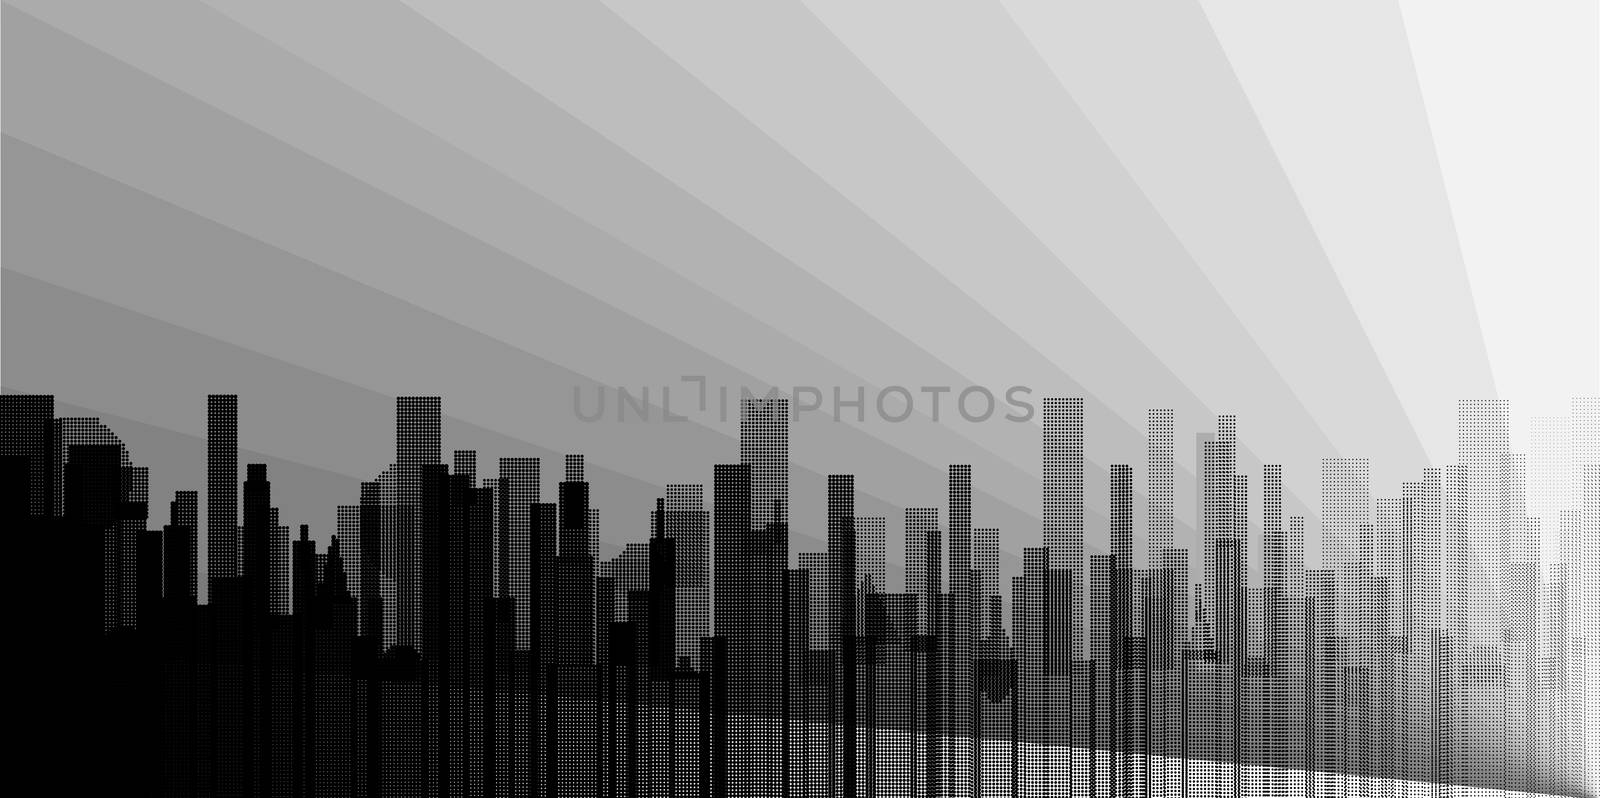 A grey cityscape with pollution shown in grey and silhouette.